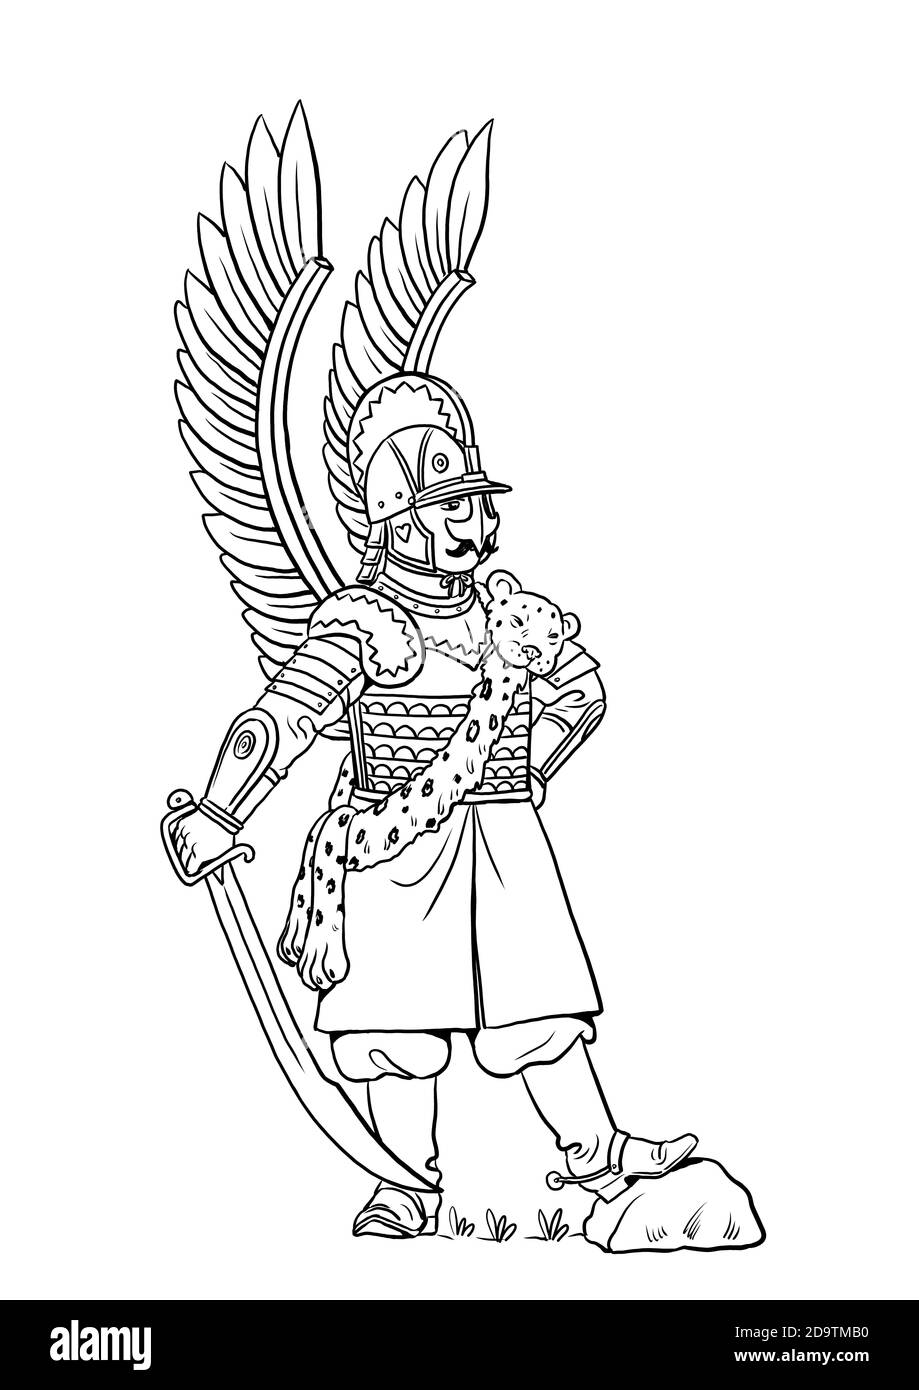 Winged polish hussar for coloring. Colouring template for children. Stock Photo